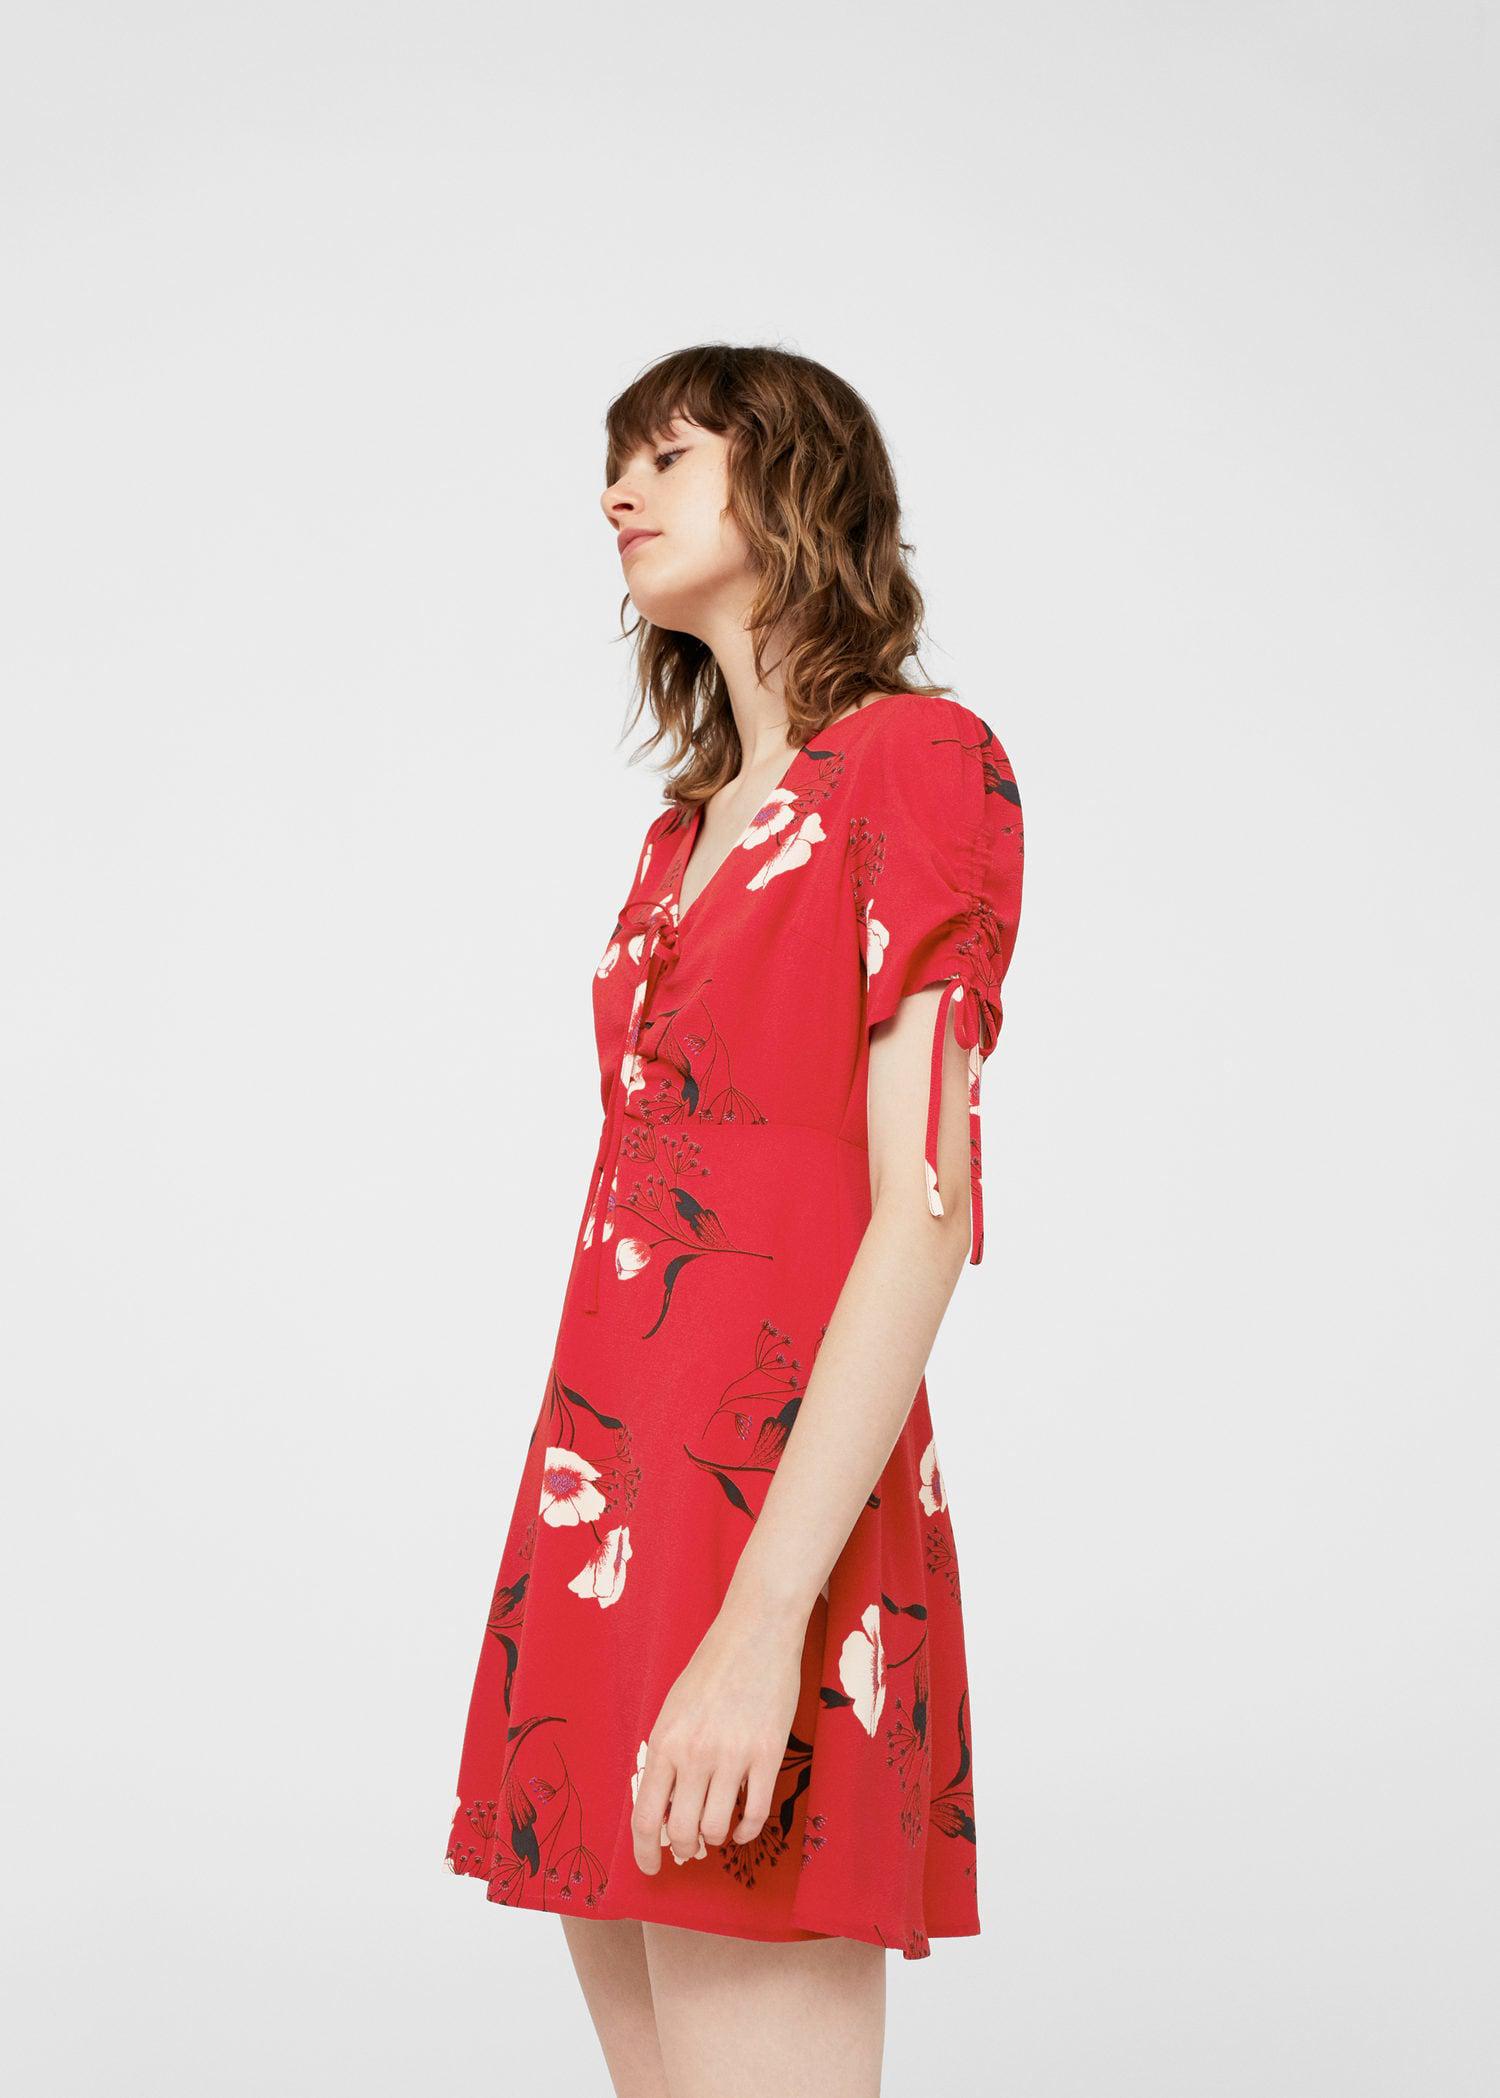 Lyst - Mango Floral Print Dress in Red